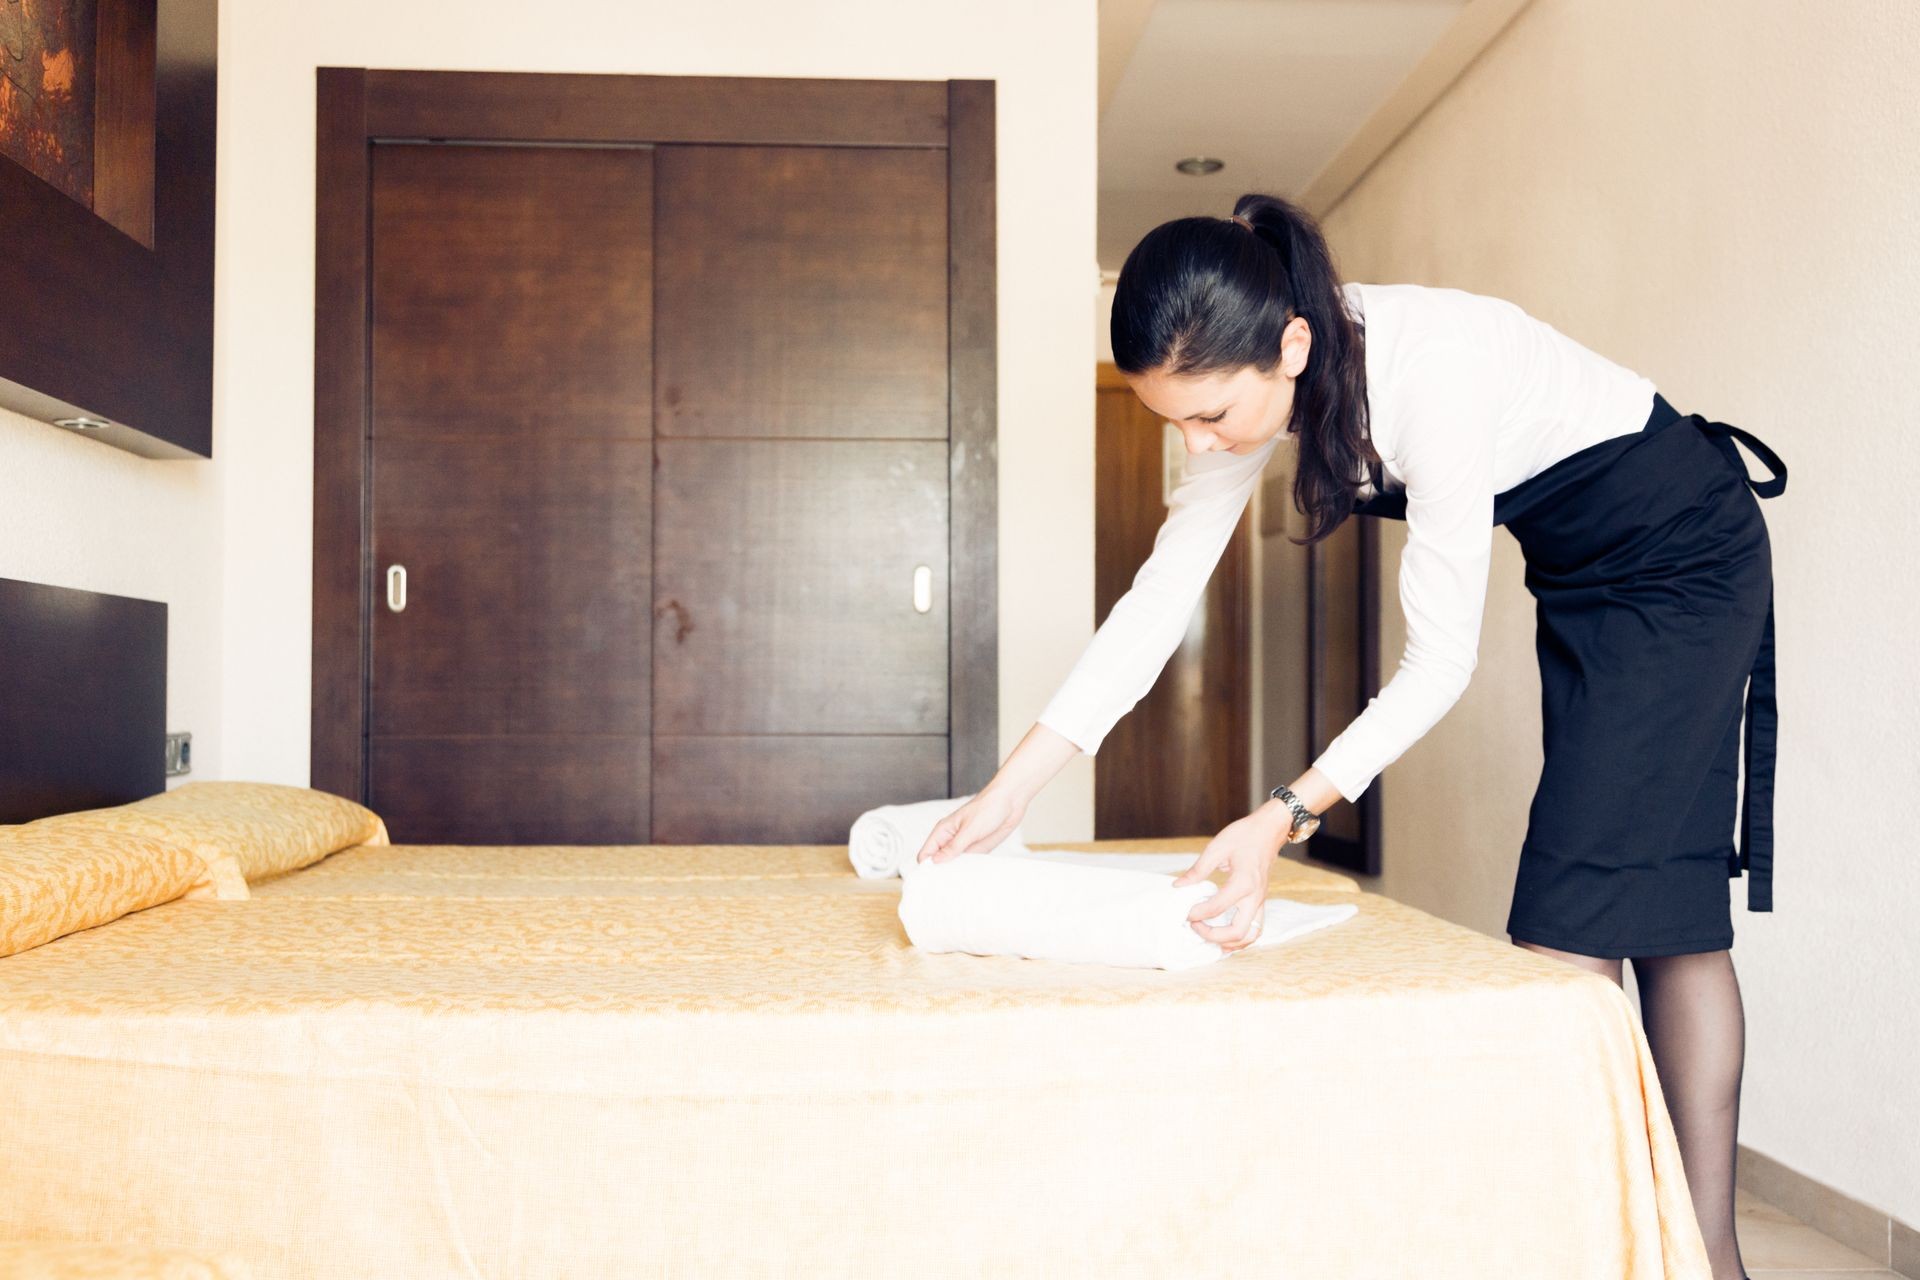 Maid Making A Hotel Room